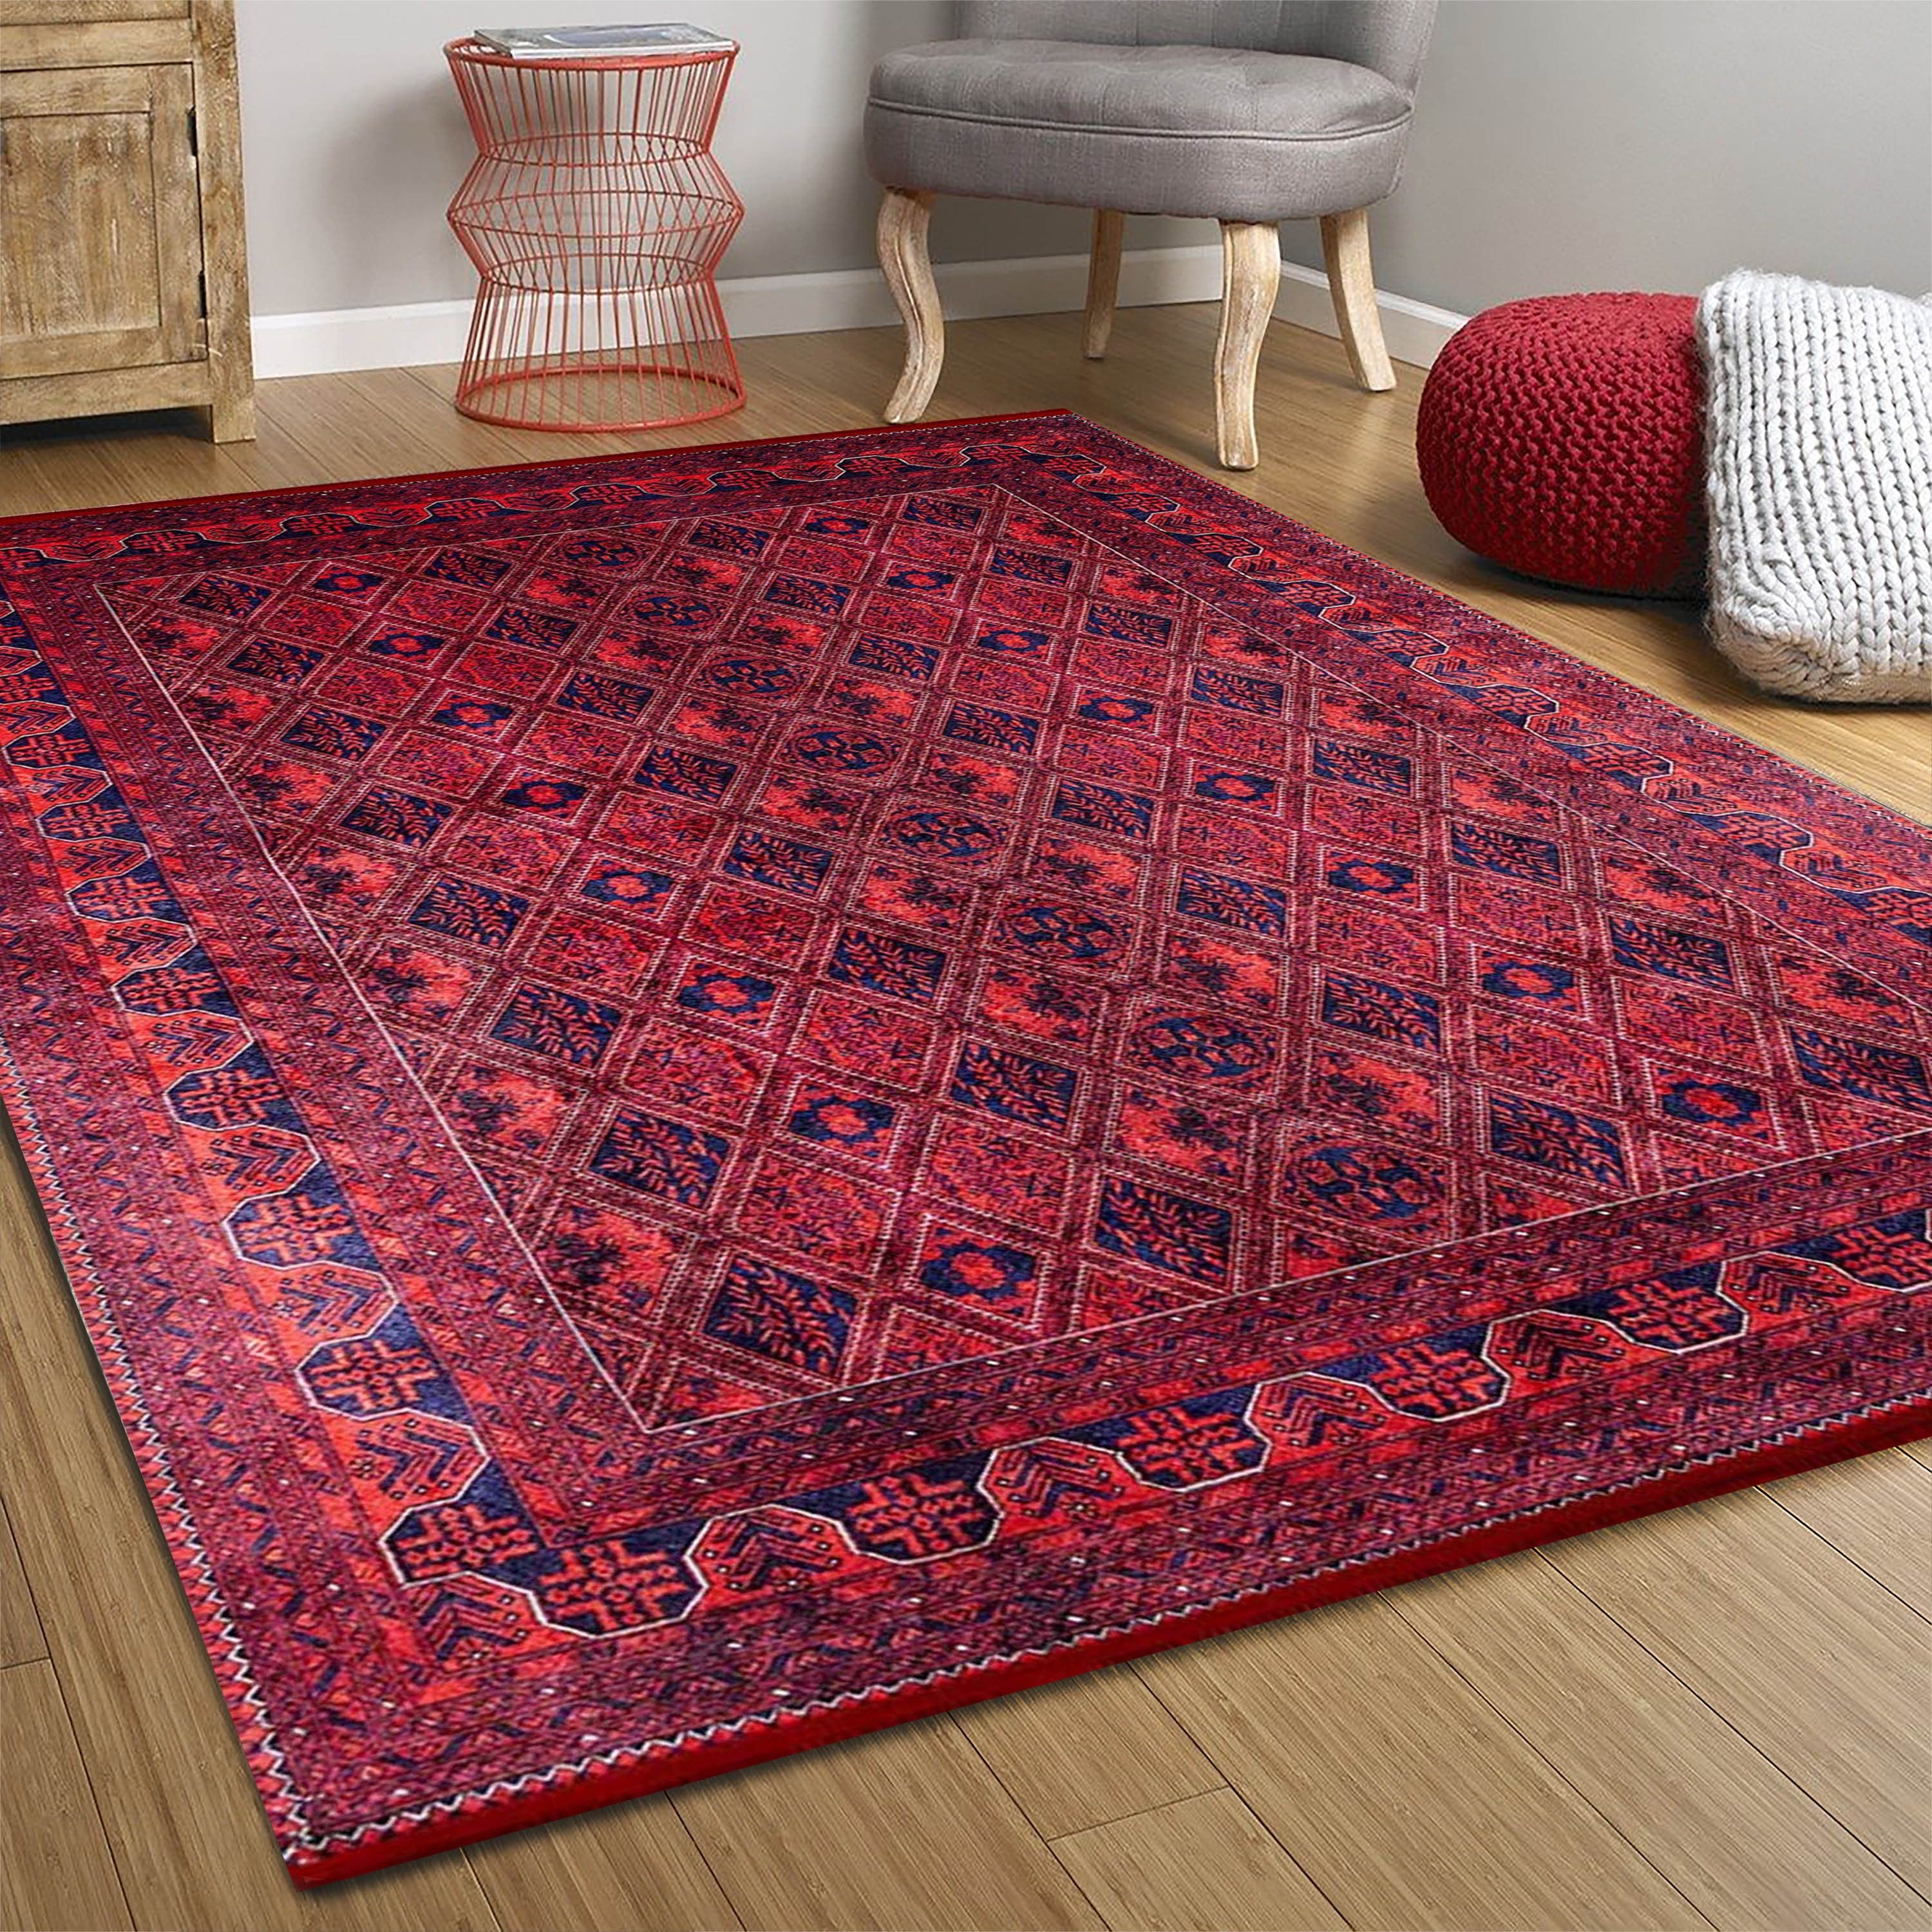 Afghan Rug Burgundy Red Oversized Area Rugs 10X13 9X12 8X10 – Etsy For Burgundy Rugs (Photo 14 of 15)